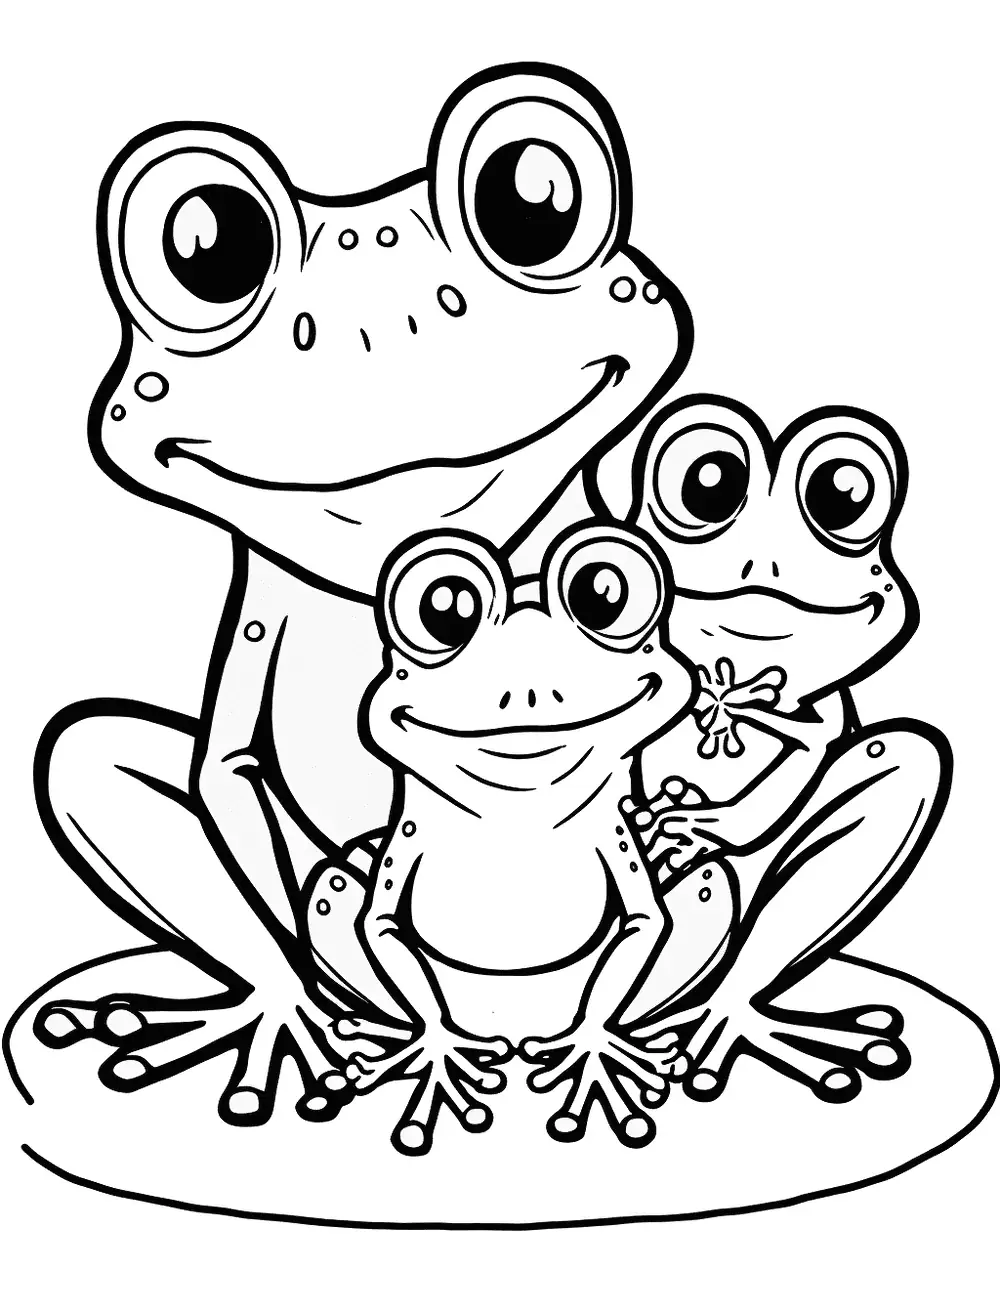 Cartoon Frog Family Coloring Page - A family of cartoon frogs, each with a different personality